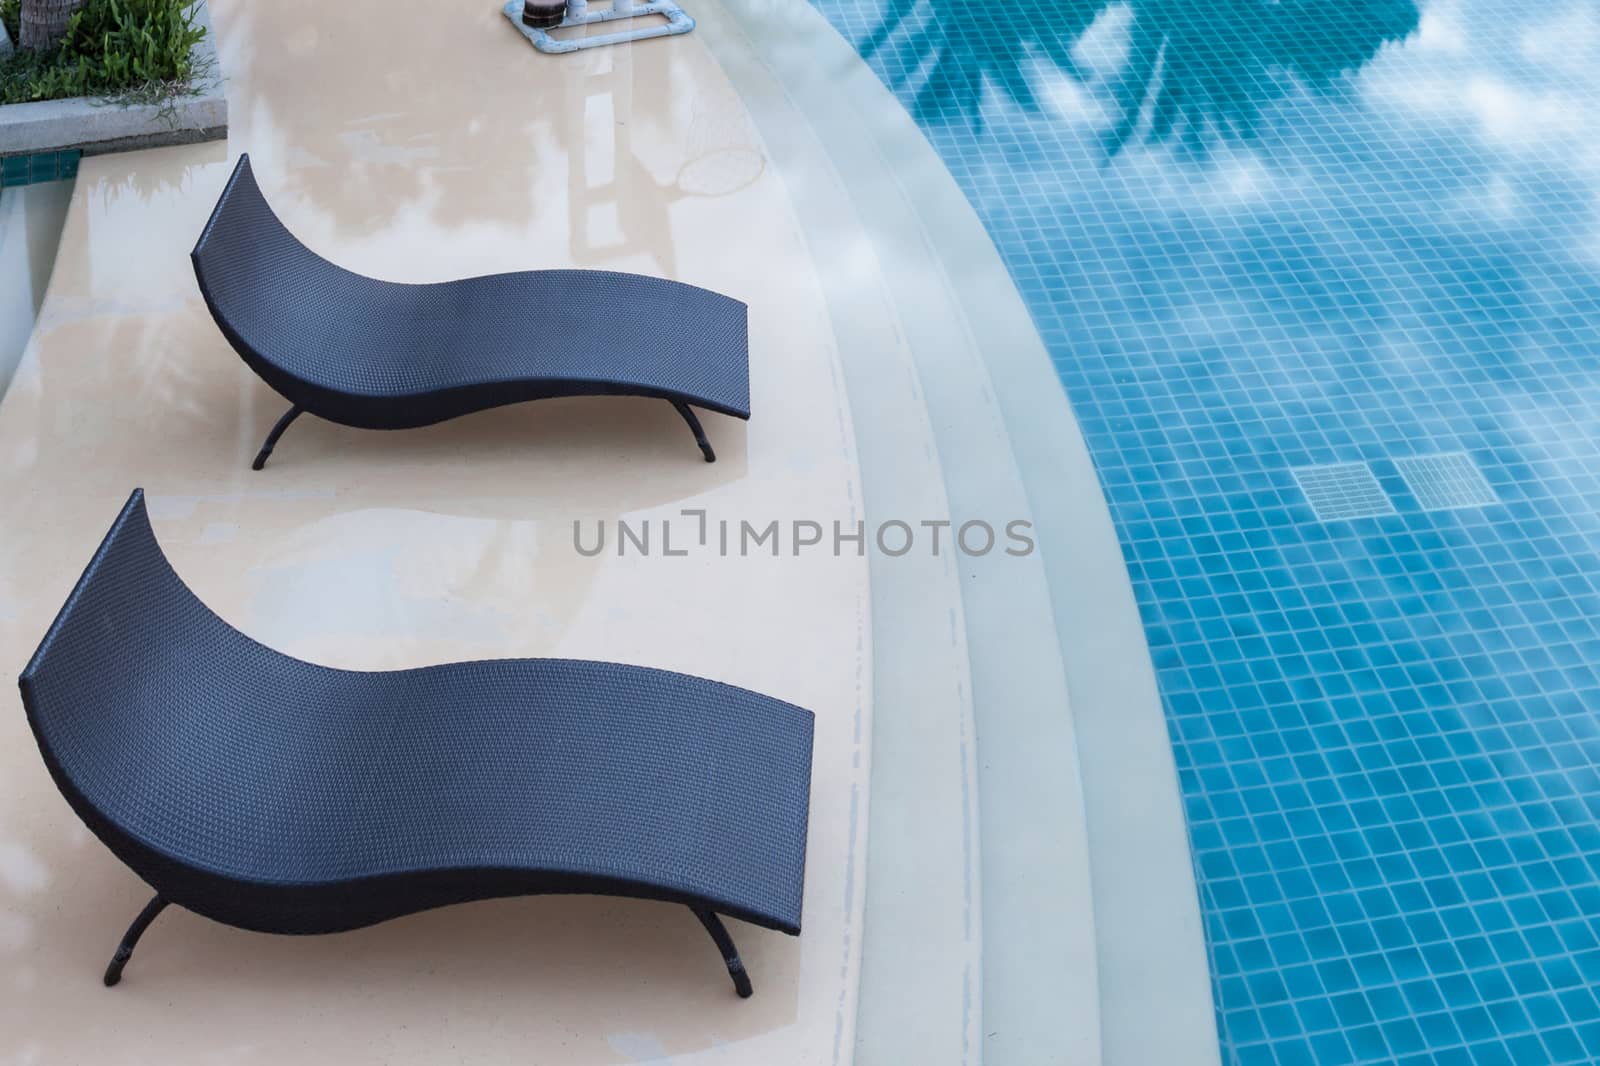 Beach chairs near swimming pool, top view by FrameAngel